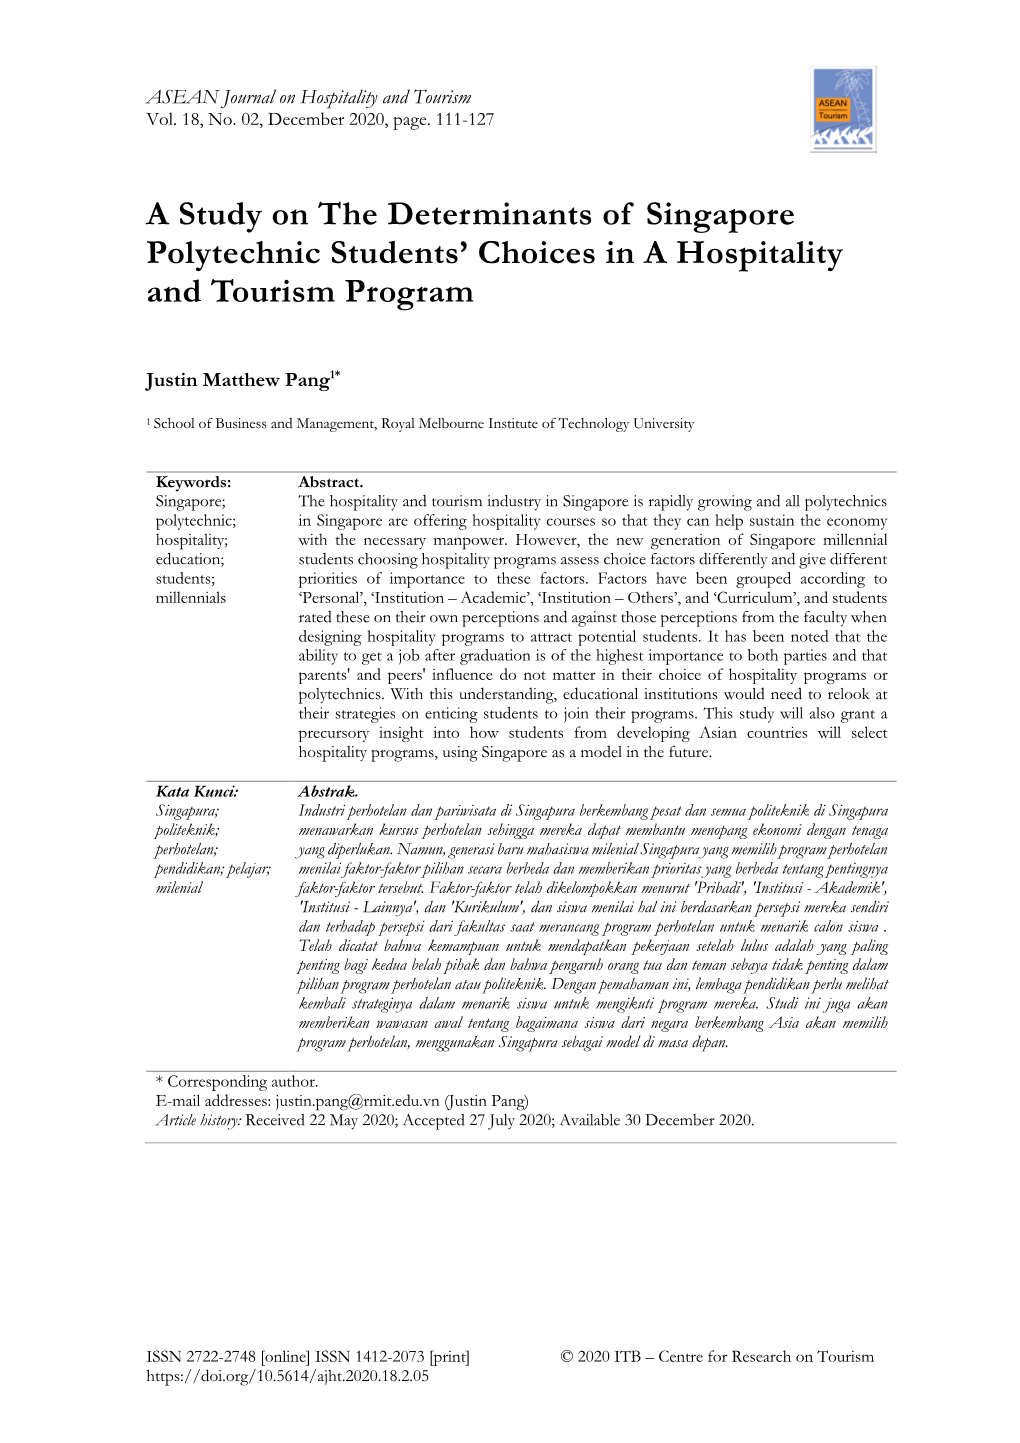 A Study on the Determinants of Singapore Polytechnic Students' Choices in a Hospitality and Tourism Program